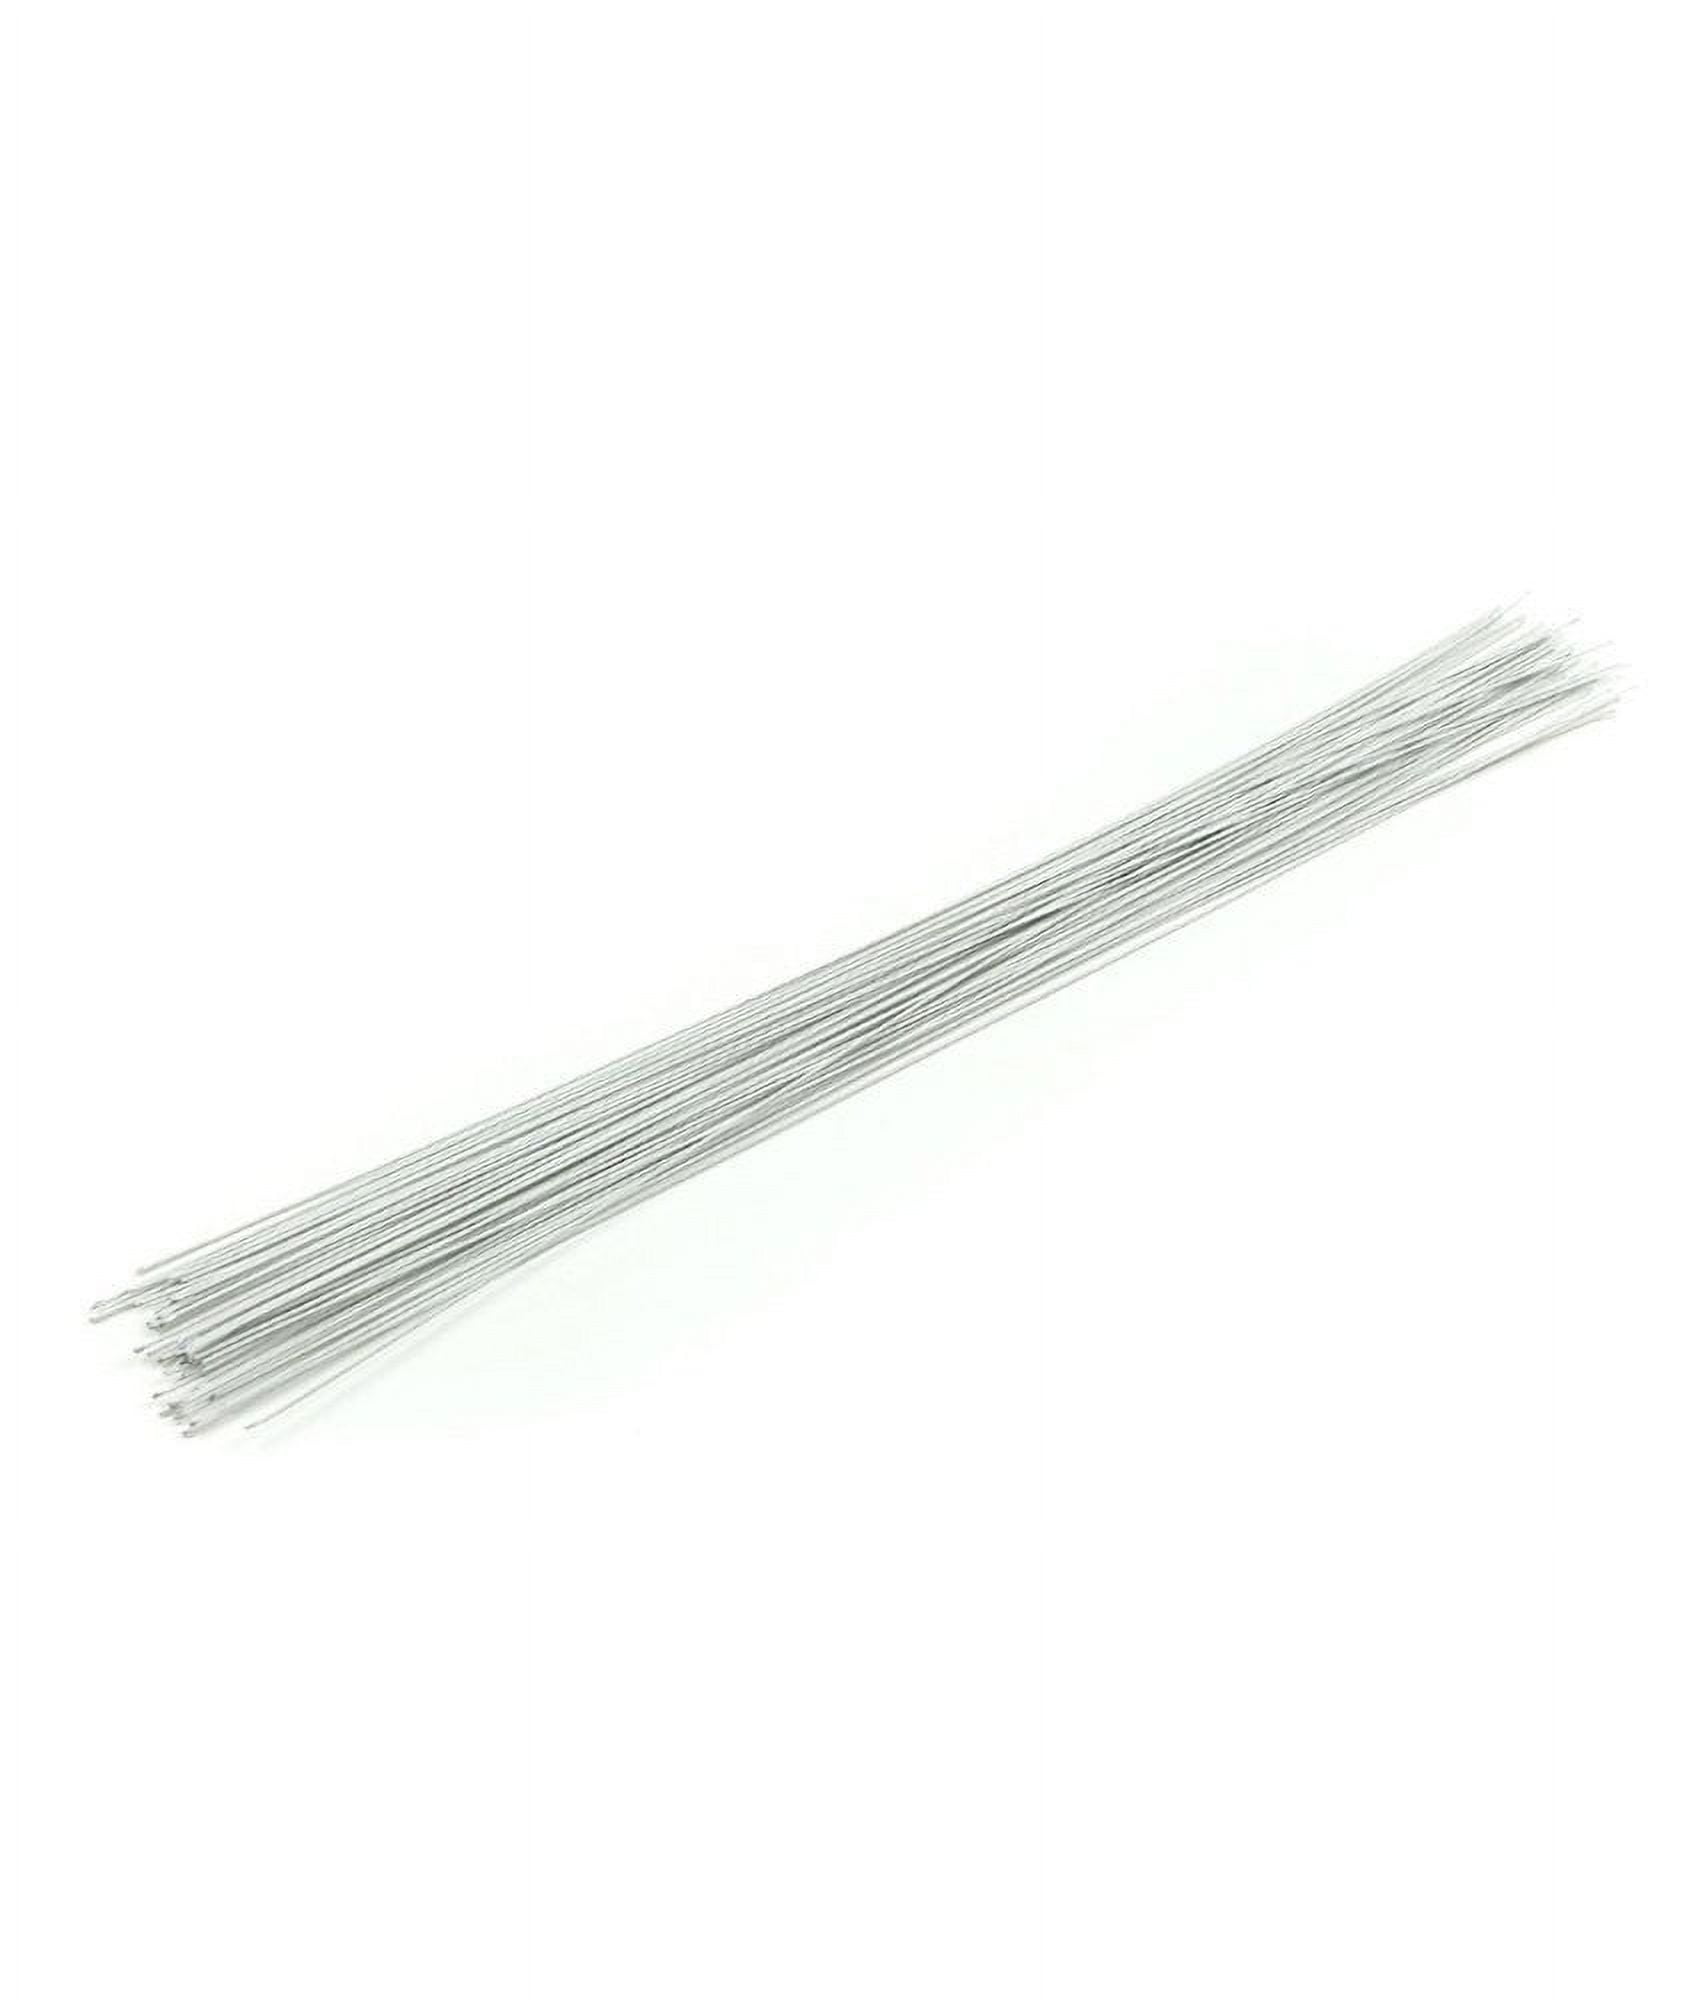 O'Creme 24 Gauge White Florist/Floral Wire 14 Inch, 50 Pieces 